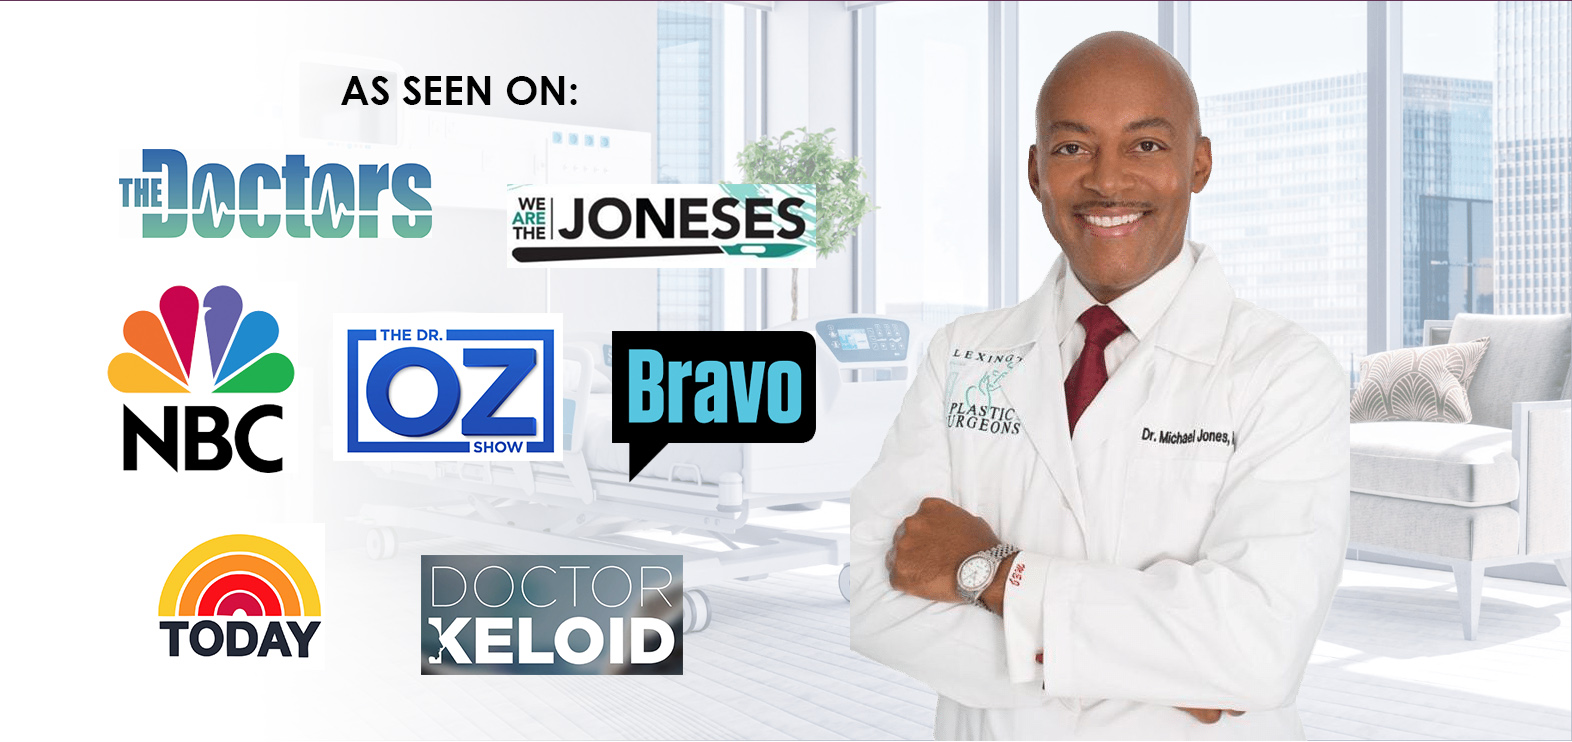 Dr. Michael Jones, founder of Lexington Plastic Surgeons, alongside logos for the Doctors, We Are the Joneses, The Dr. Oz Show, Bravo, and other shows and networks on which he's been featured